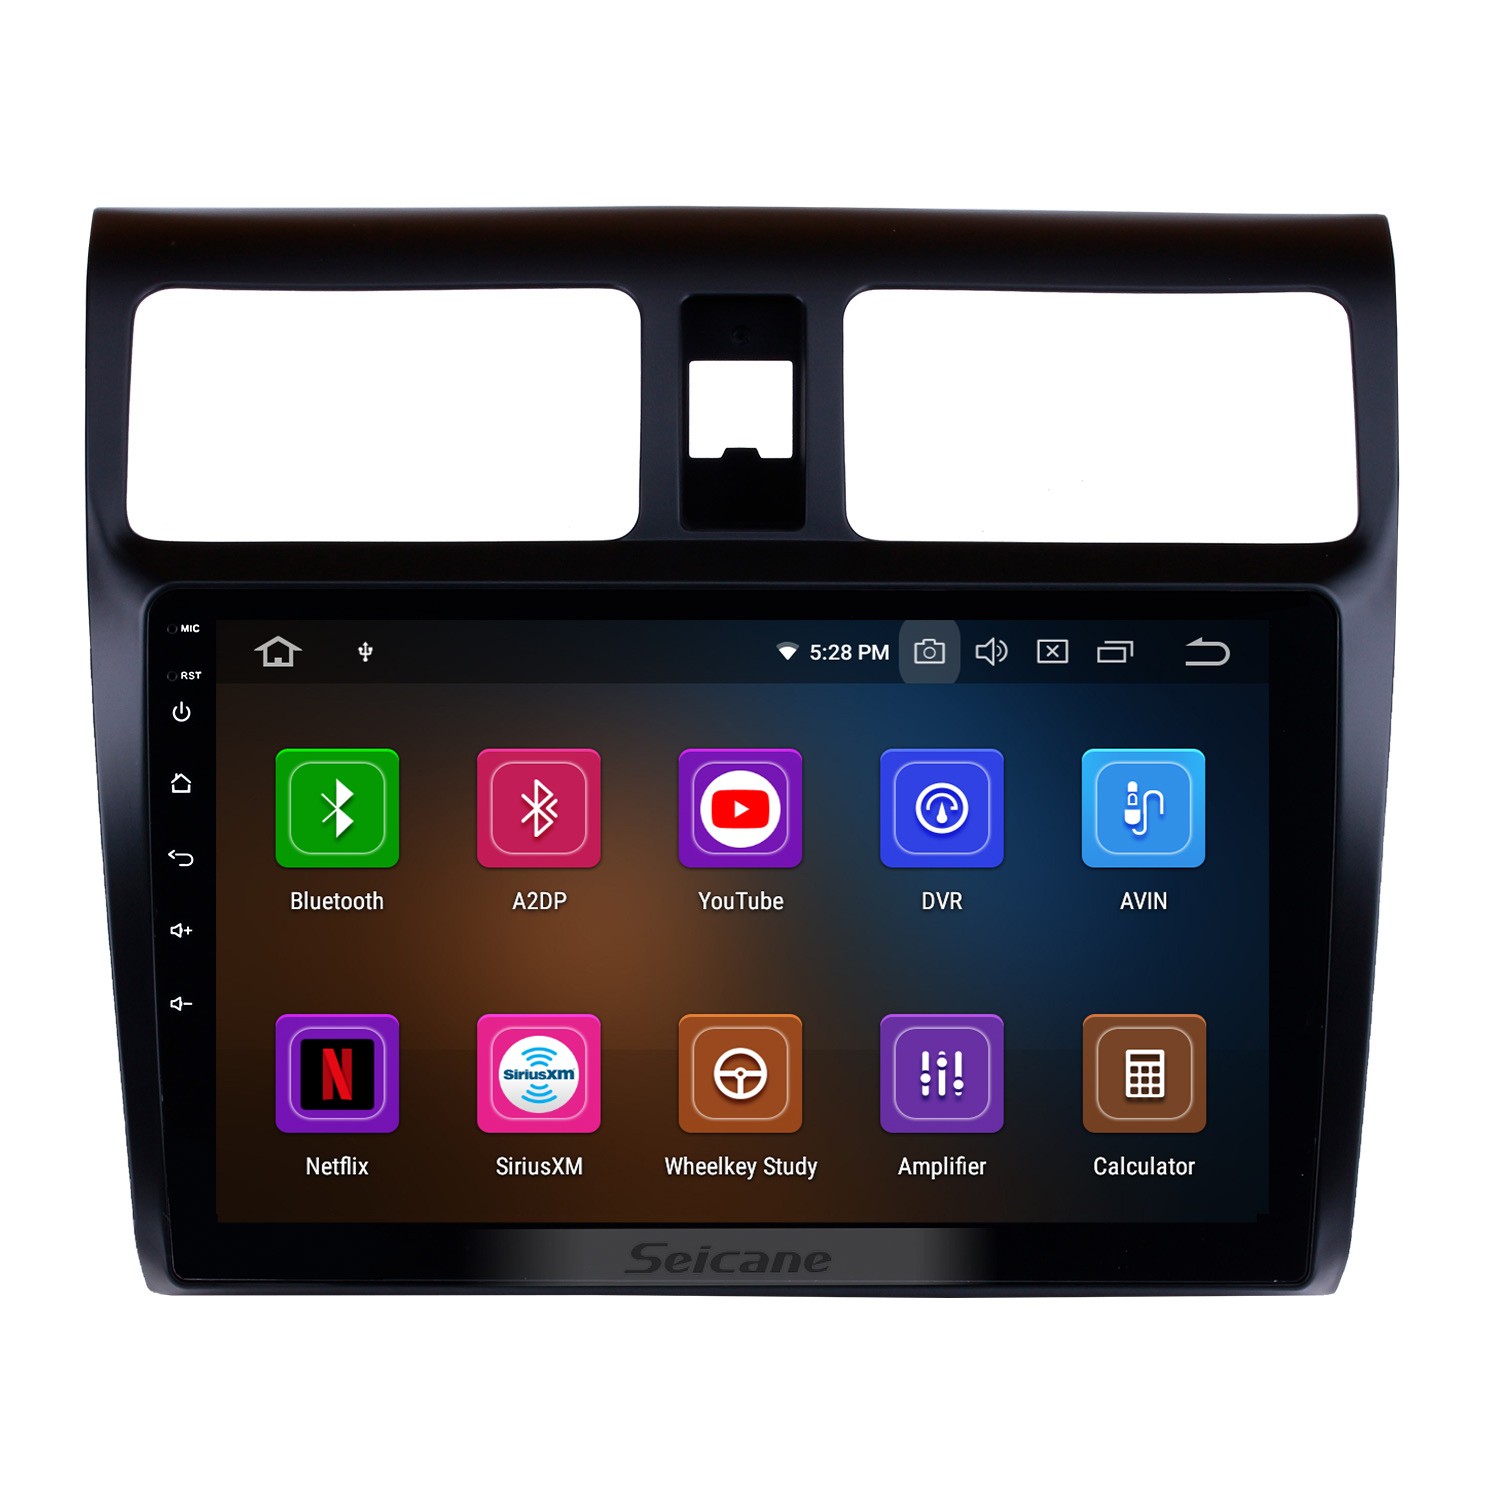 1G+32G Android Car Radio for Suzuki Swift 2005 2006 2007 2008 2009 2010,  Rimoody 10.1 inch Touch Screen Car Stereo with GPS Bluetooth WiFi FM Mirror